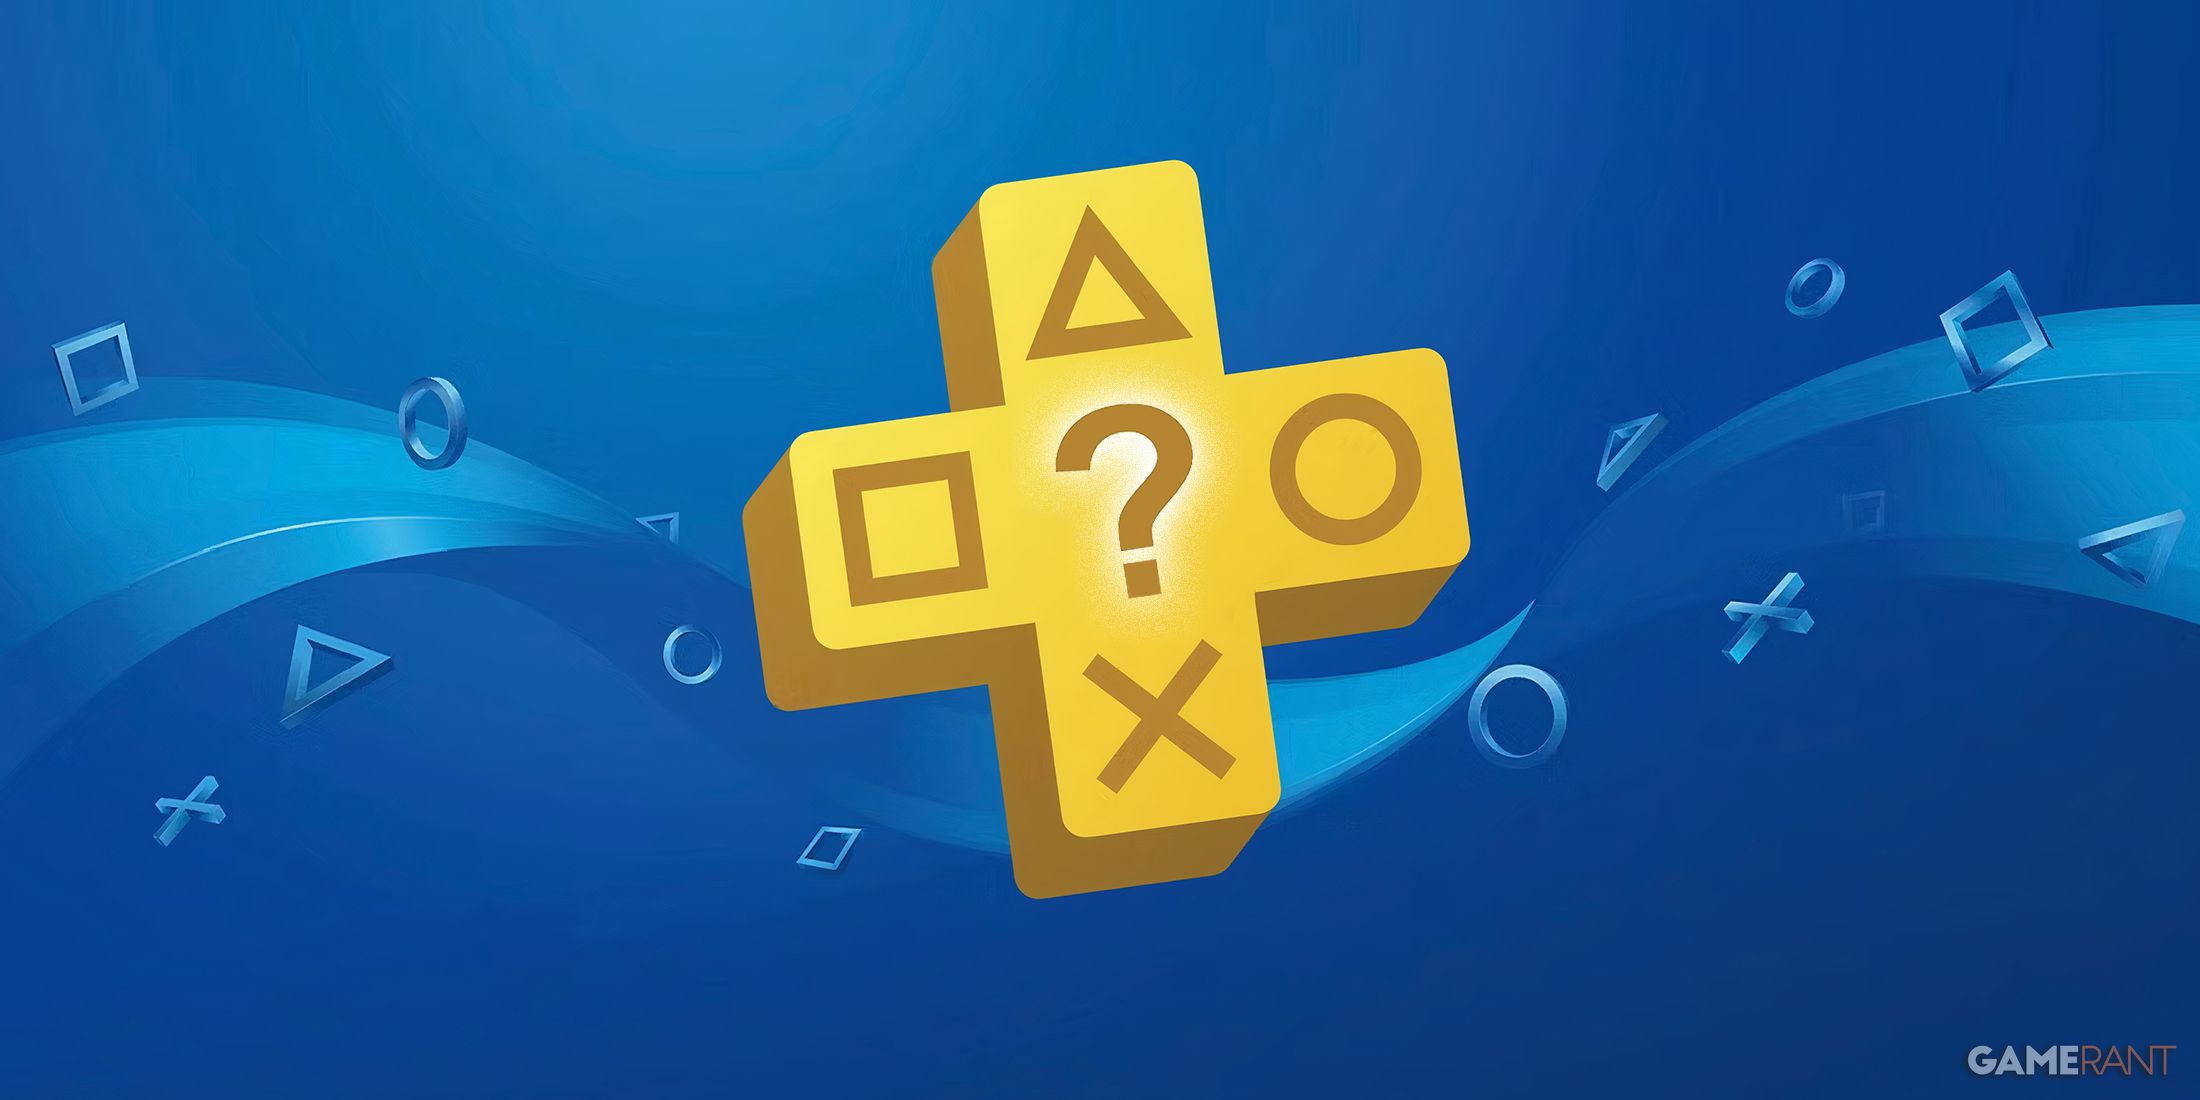 PS Plus logo with question mark